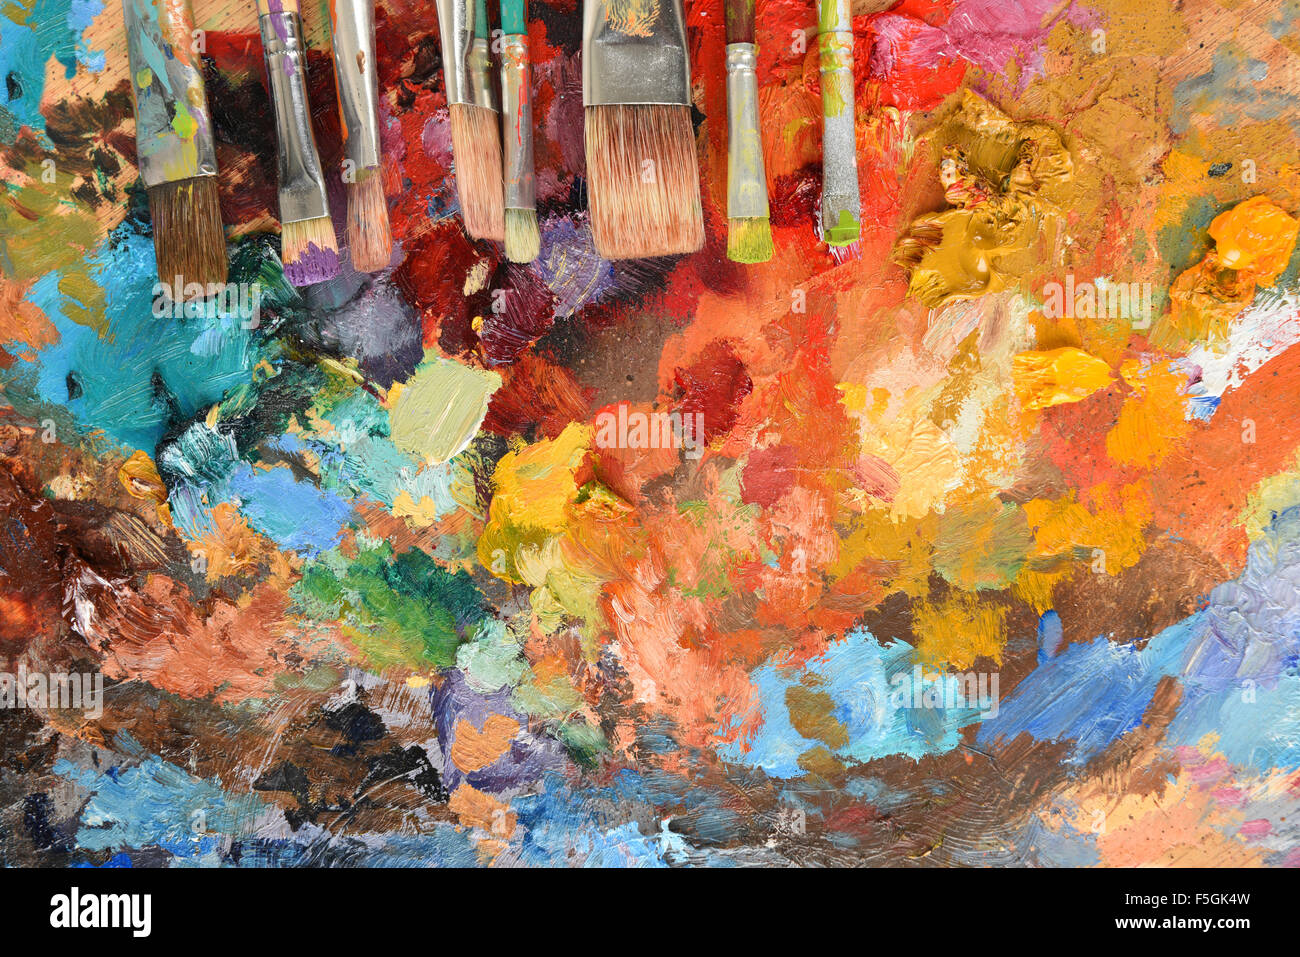 Artist's paintbrushes on palette with various oil colors Stock Photo